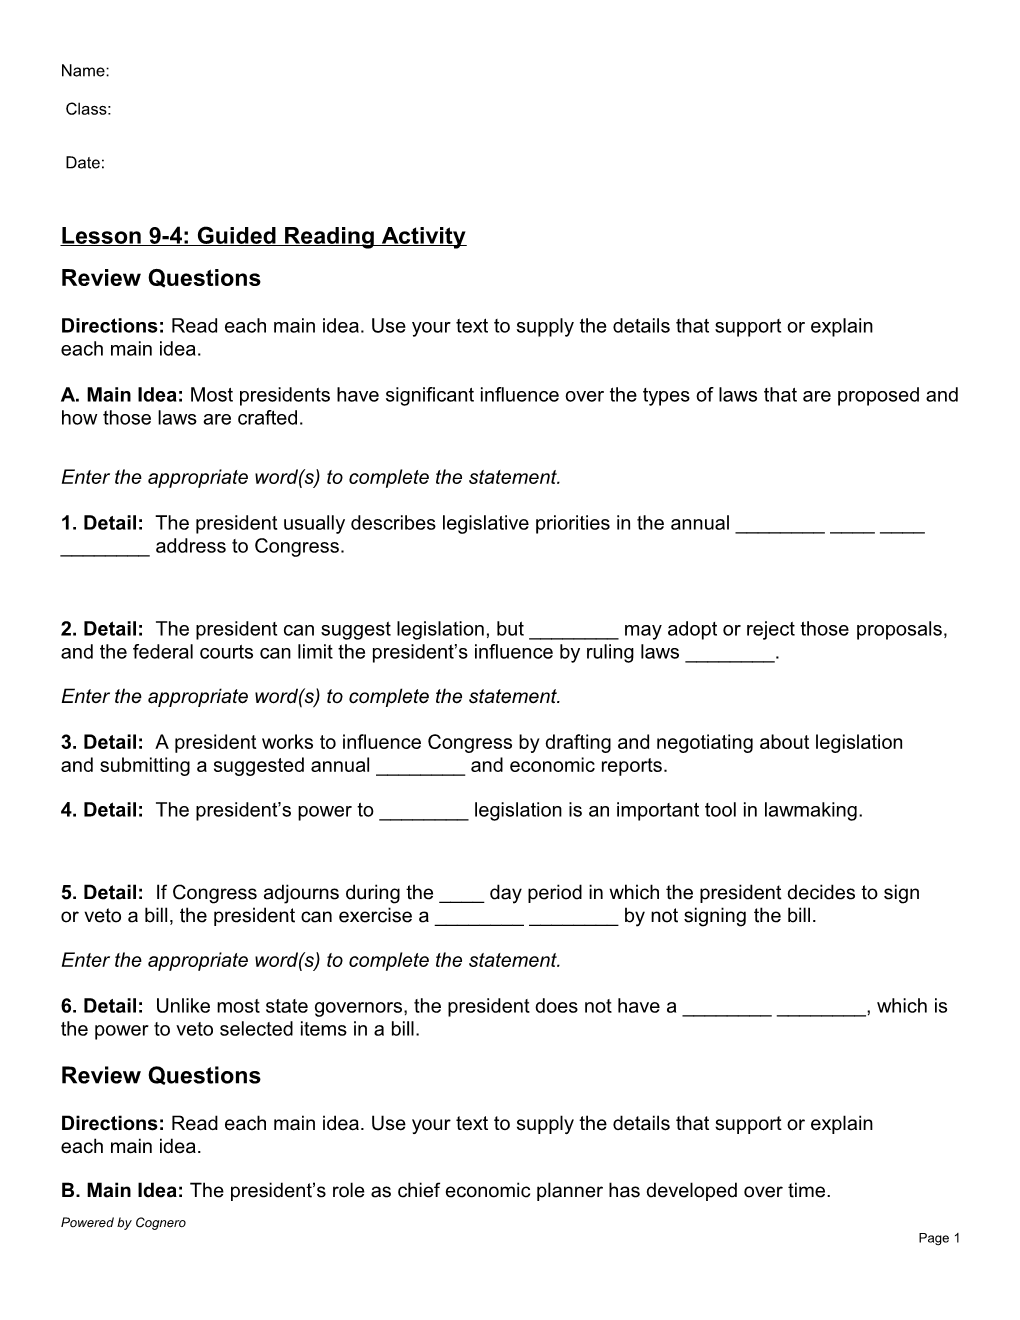 Lesson 9-4: Guided Reading Activity